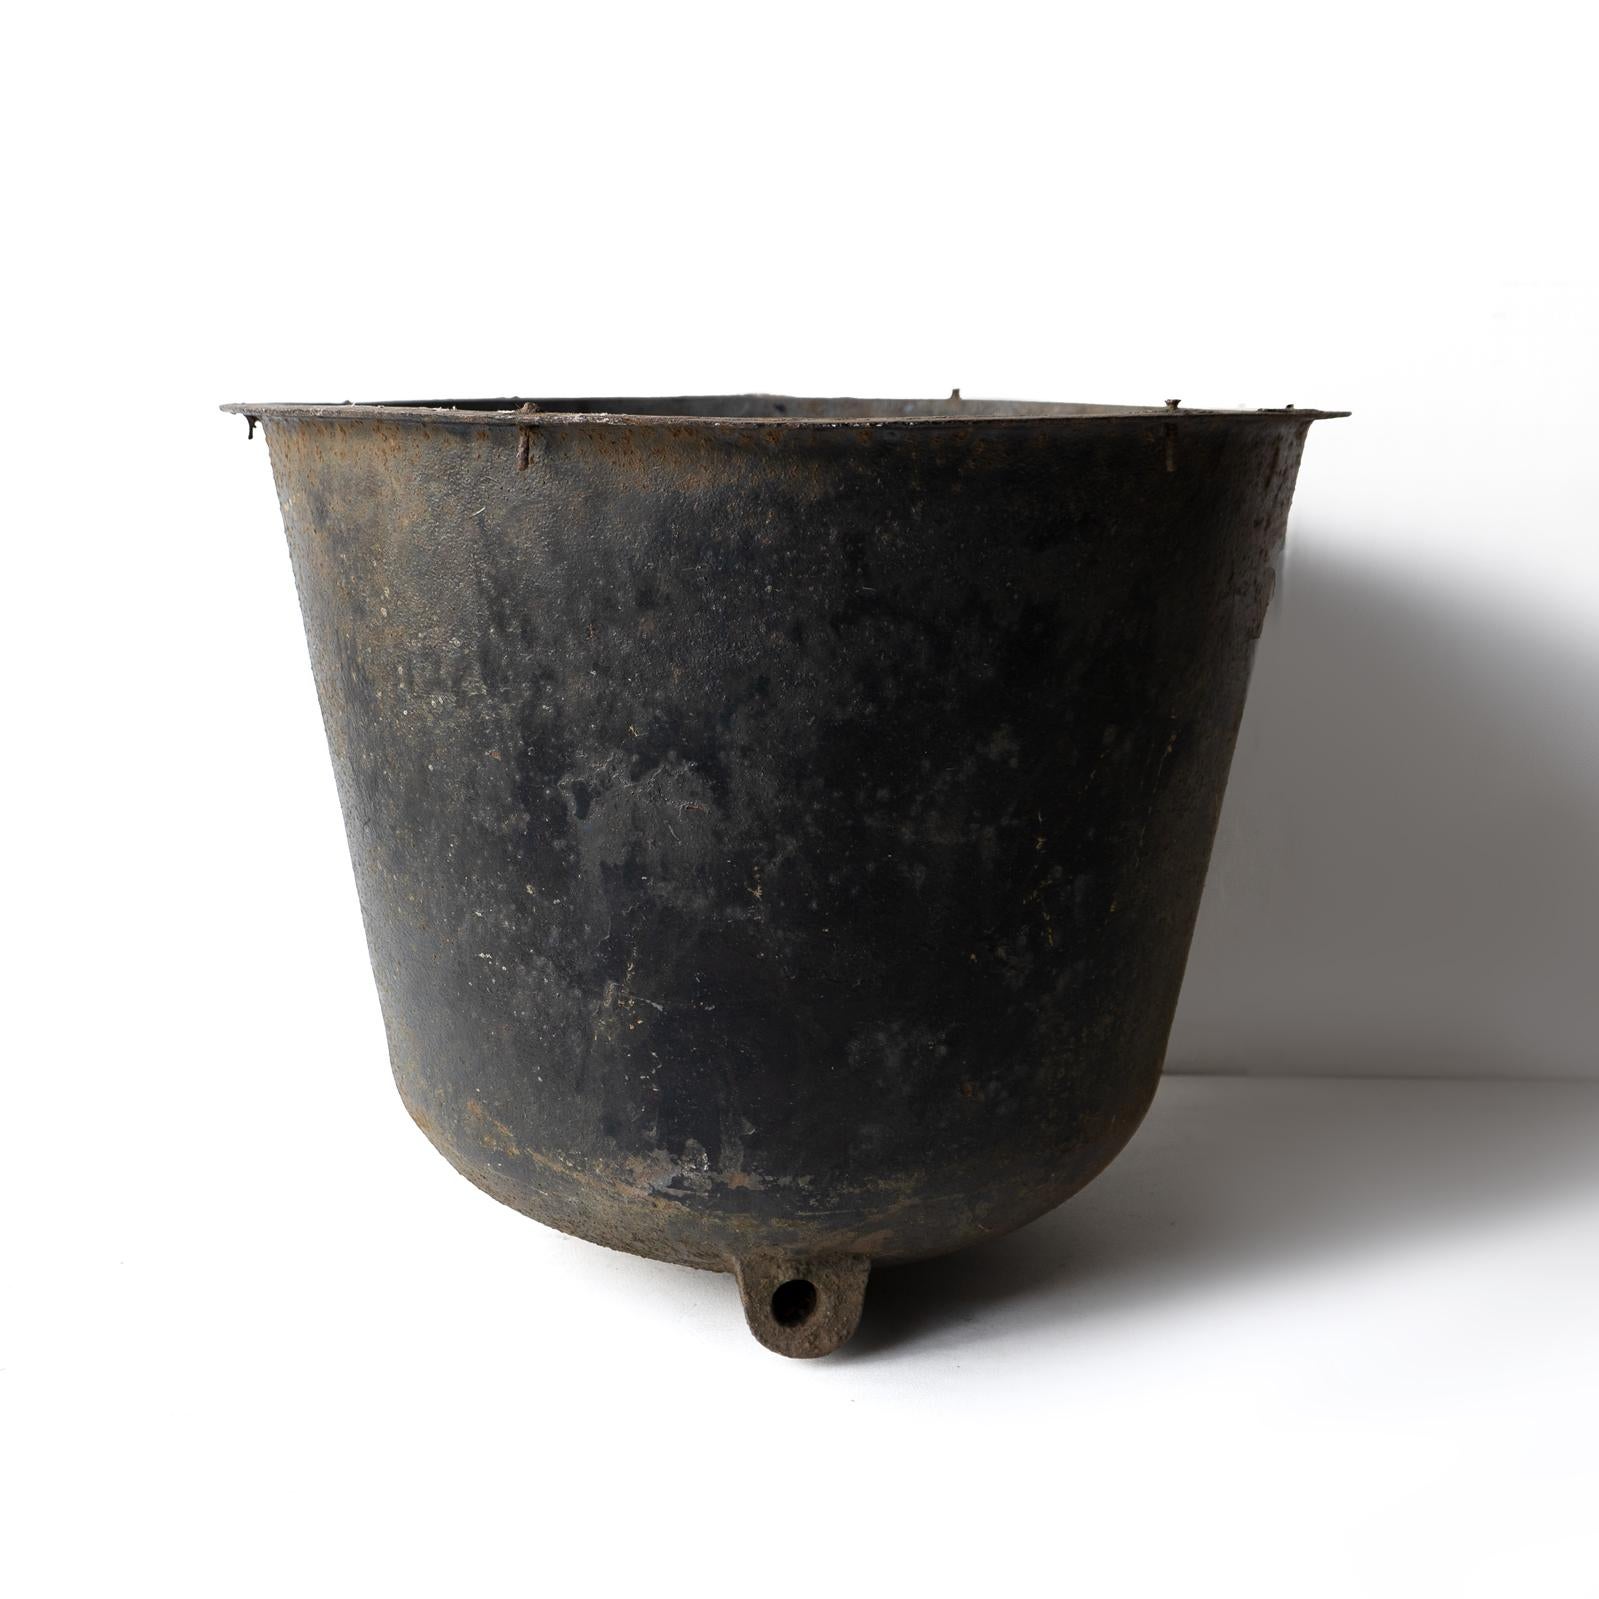 LARGE PLANTER 

Originally coming from a large country house in West Wales it would have been used for either laundry or as a large cauldron in the kitchens. 

Dating from the late 19th Century to the early 20th Century period, circa 1900. 

The